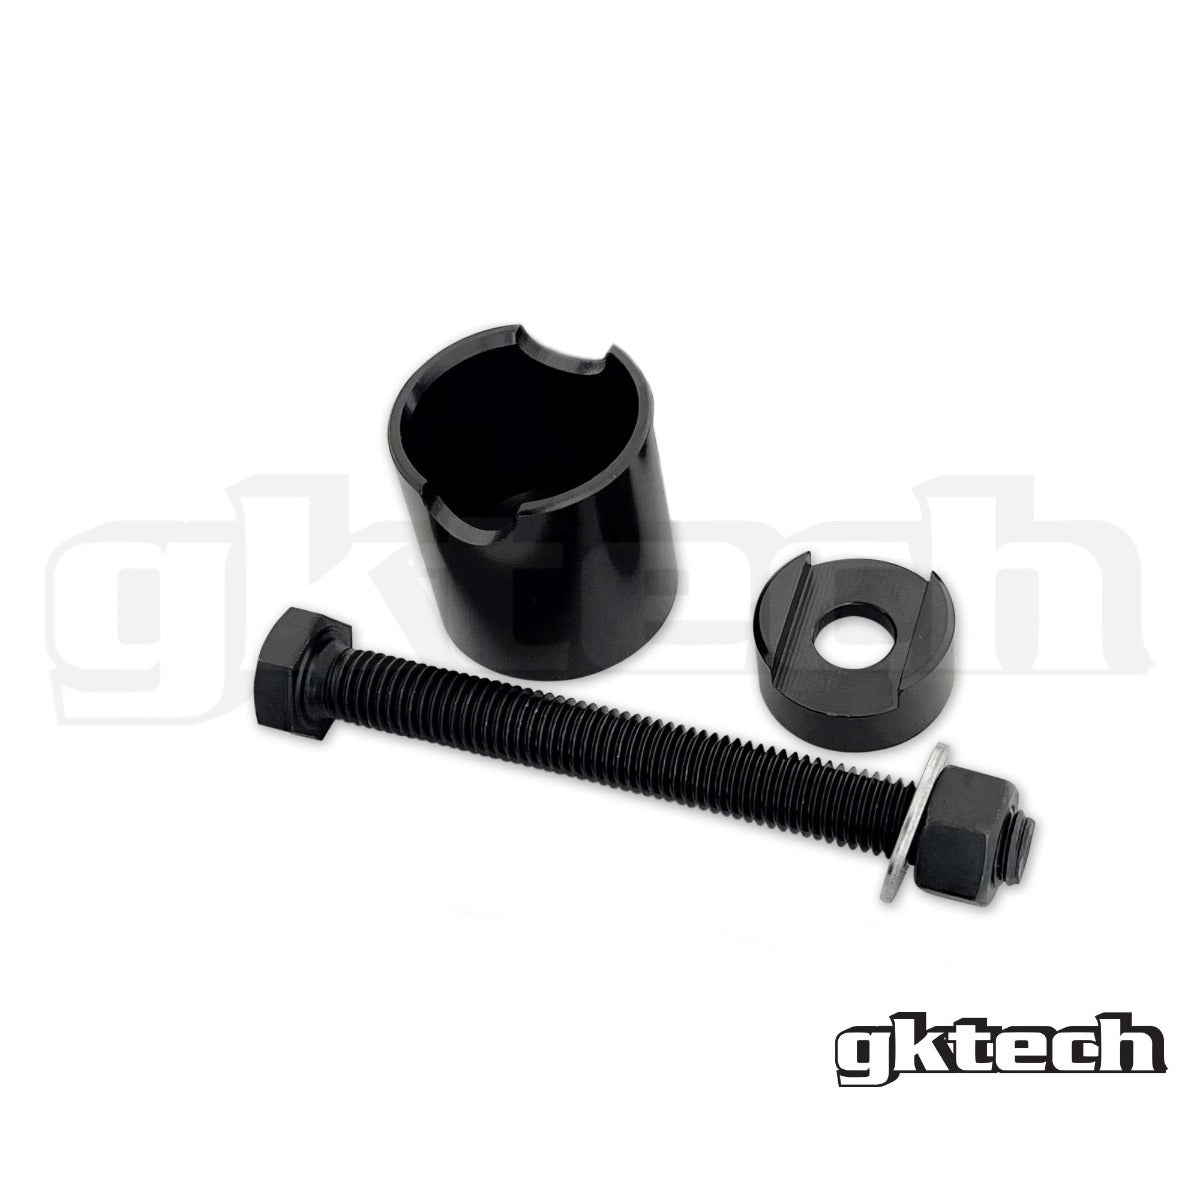 S/R Chassis rear knuckle bush removal tool/installation tool set